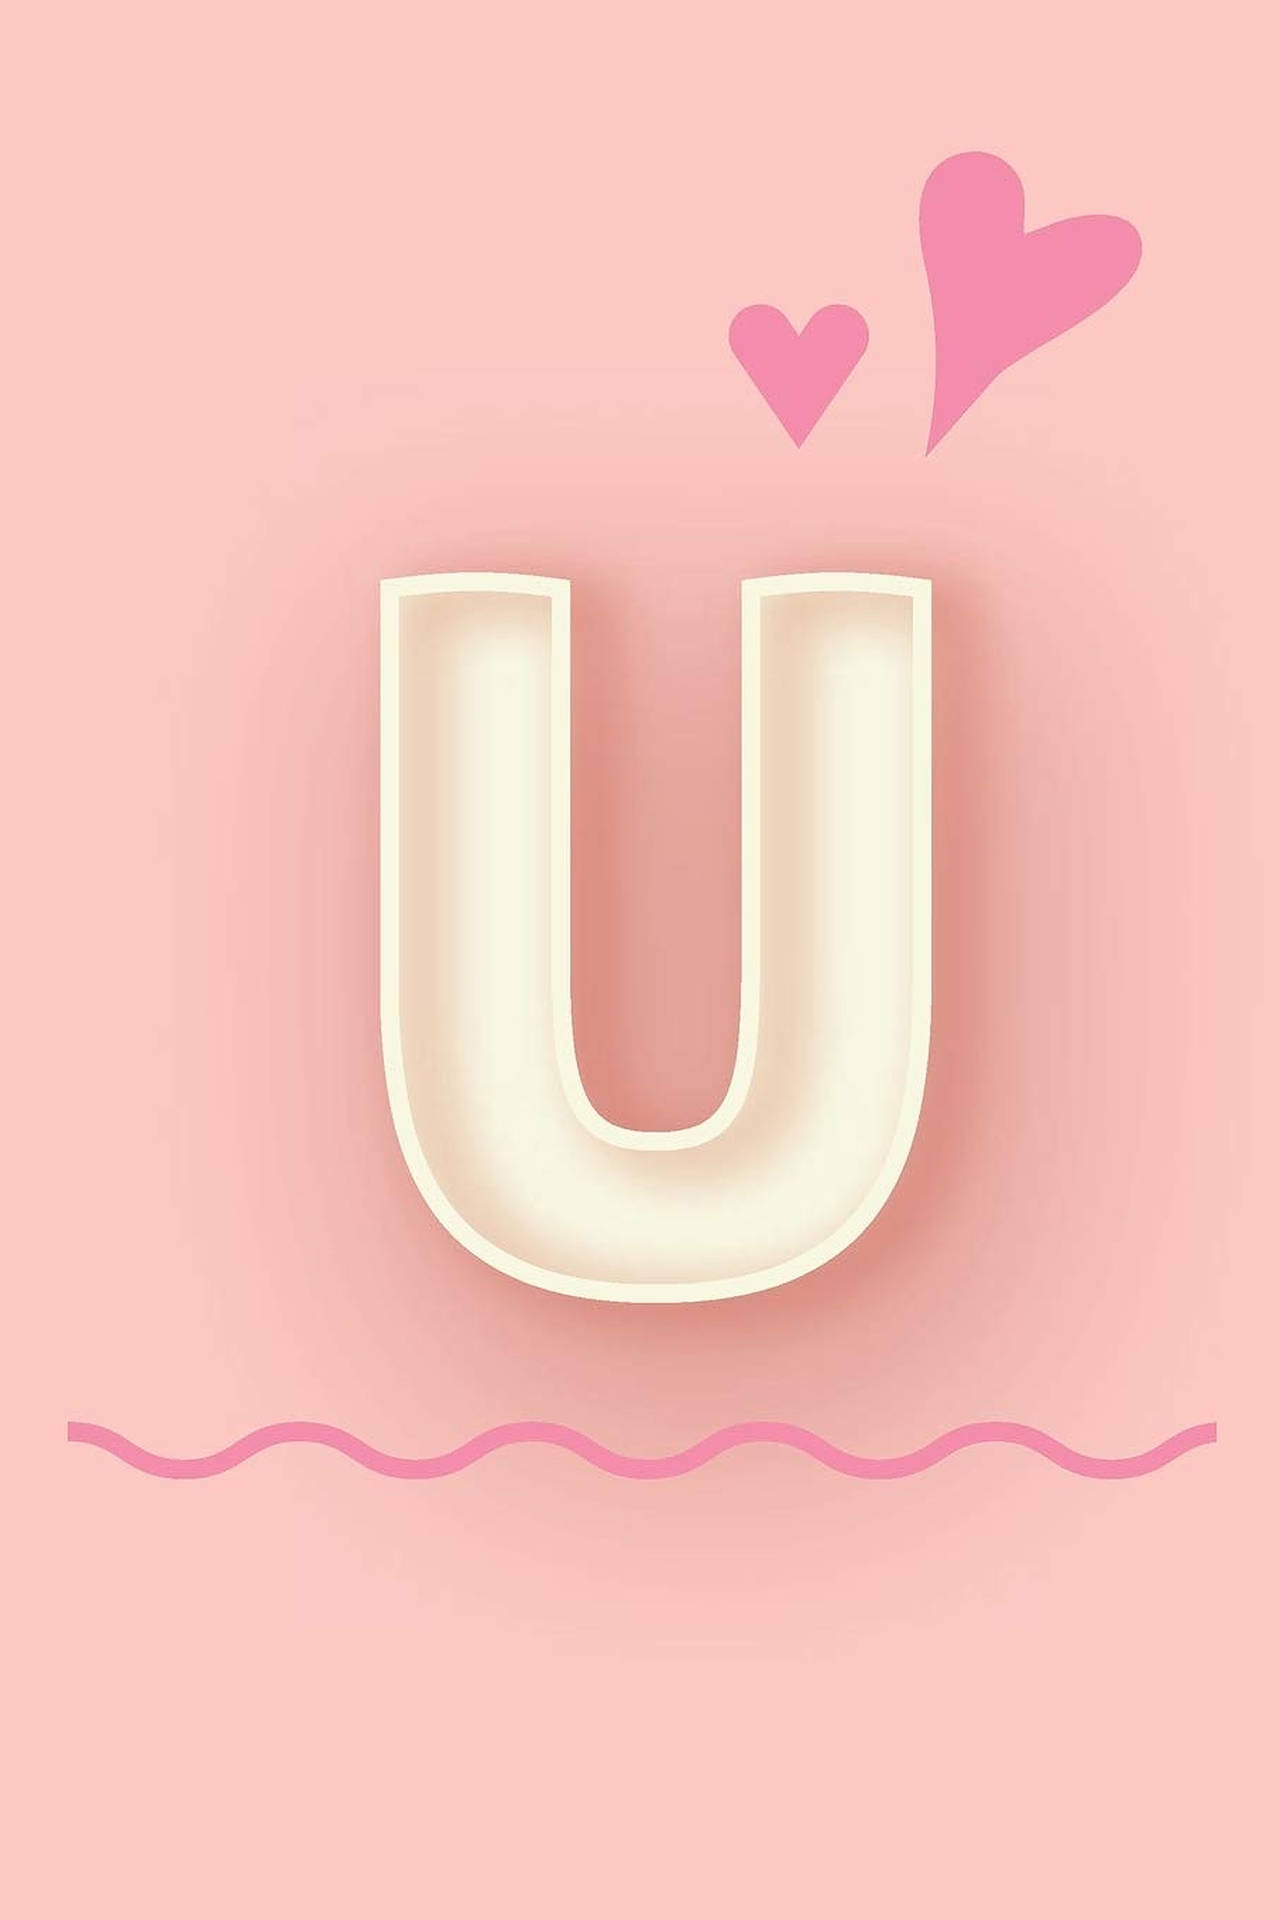 Letter U With Hearts